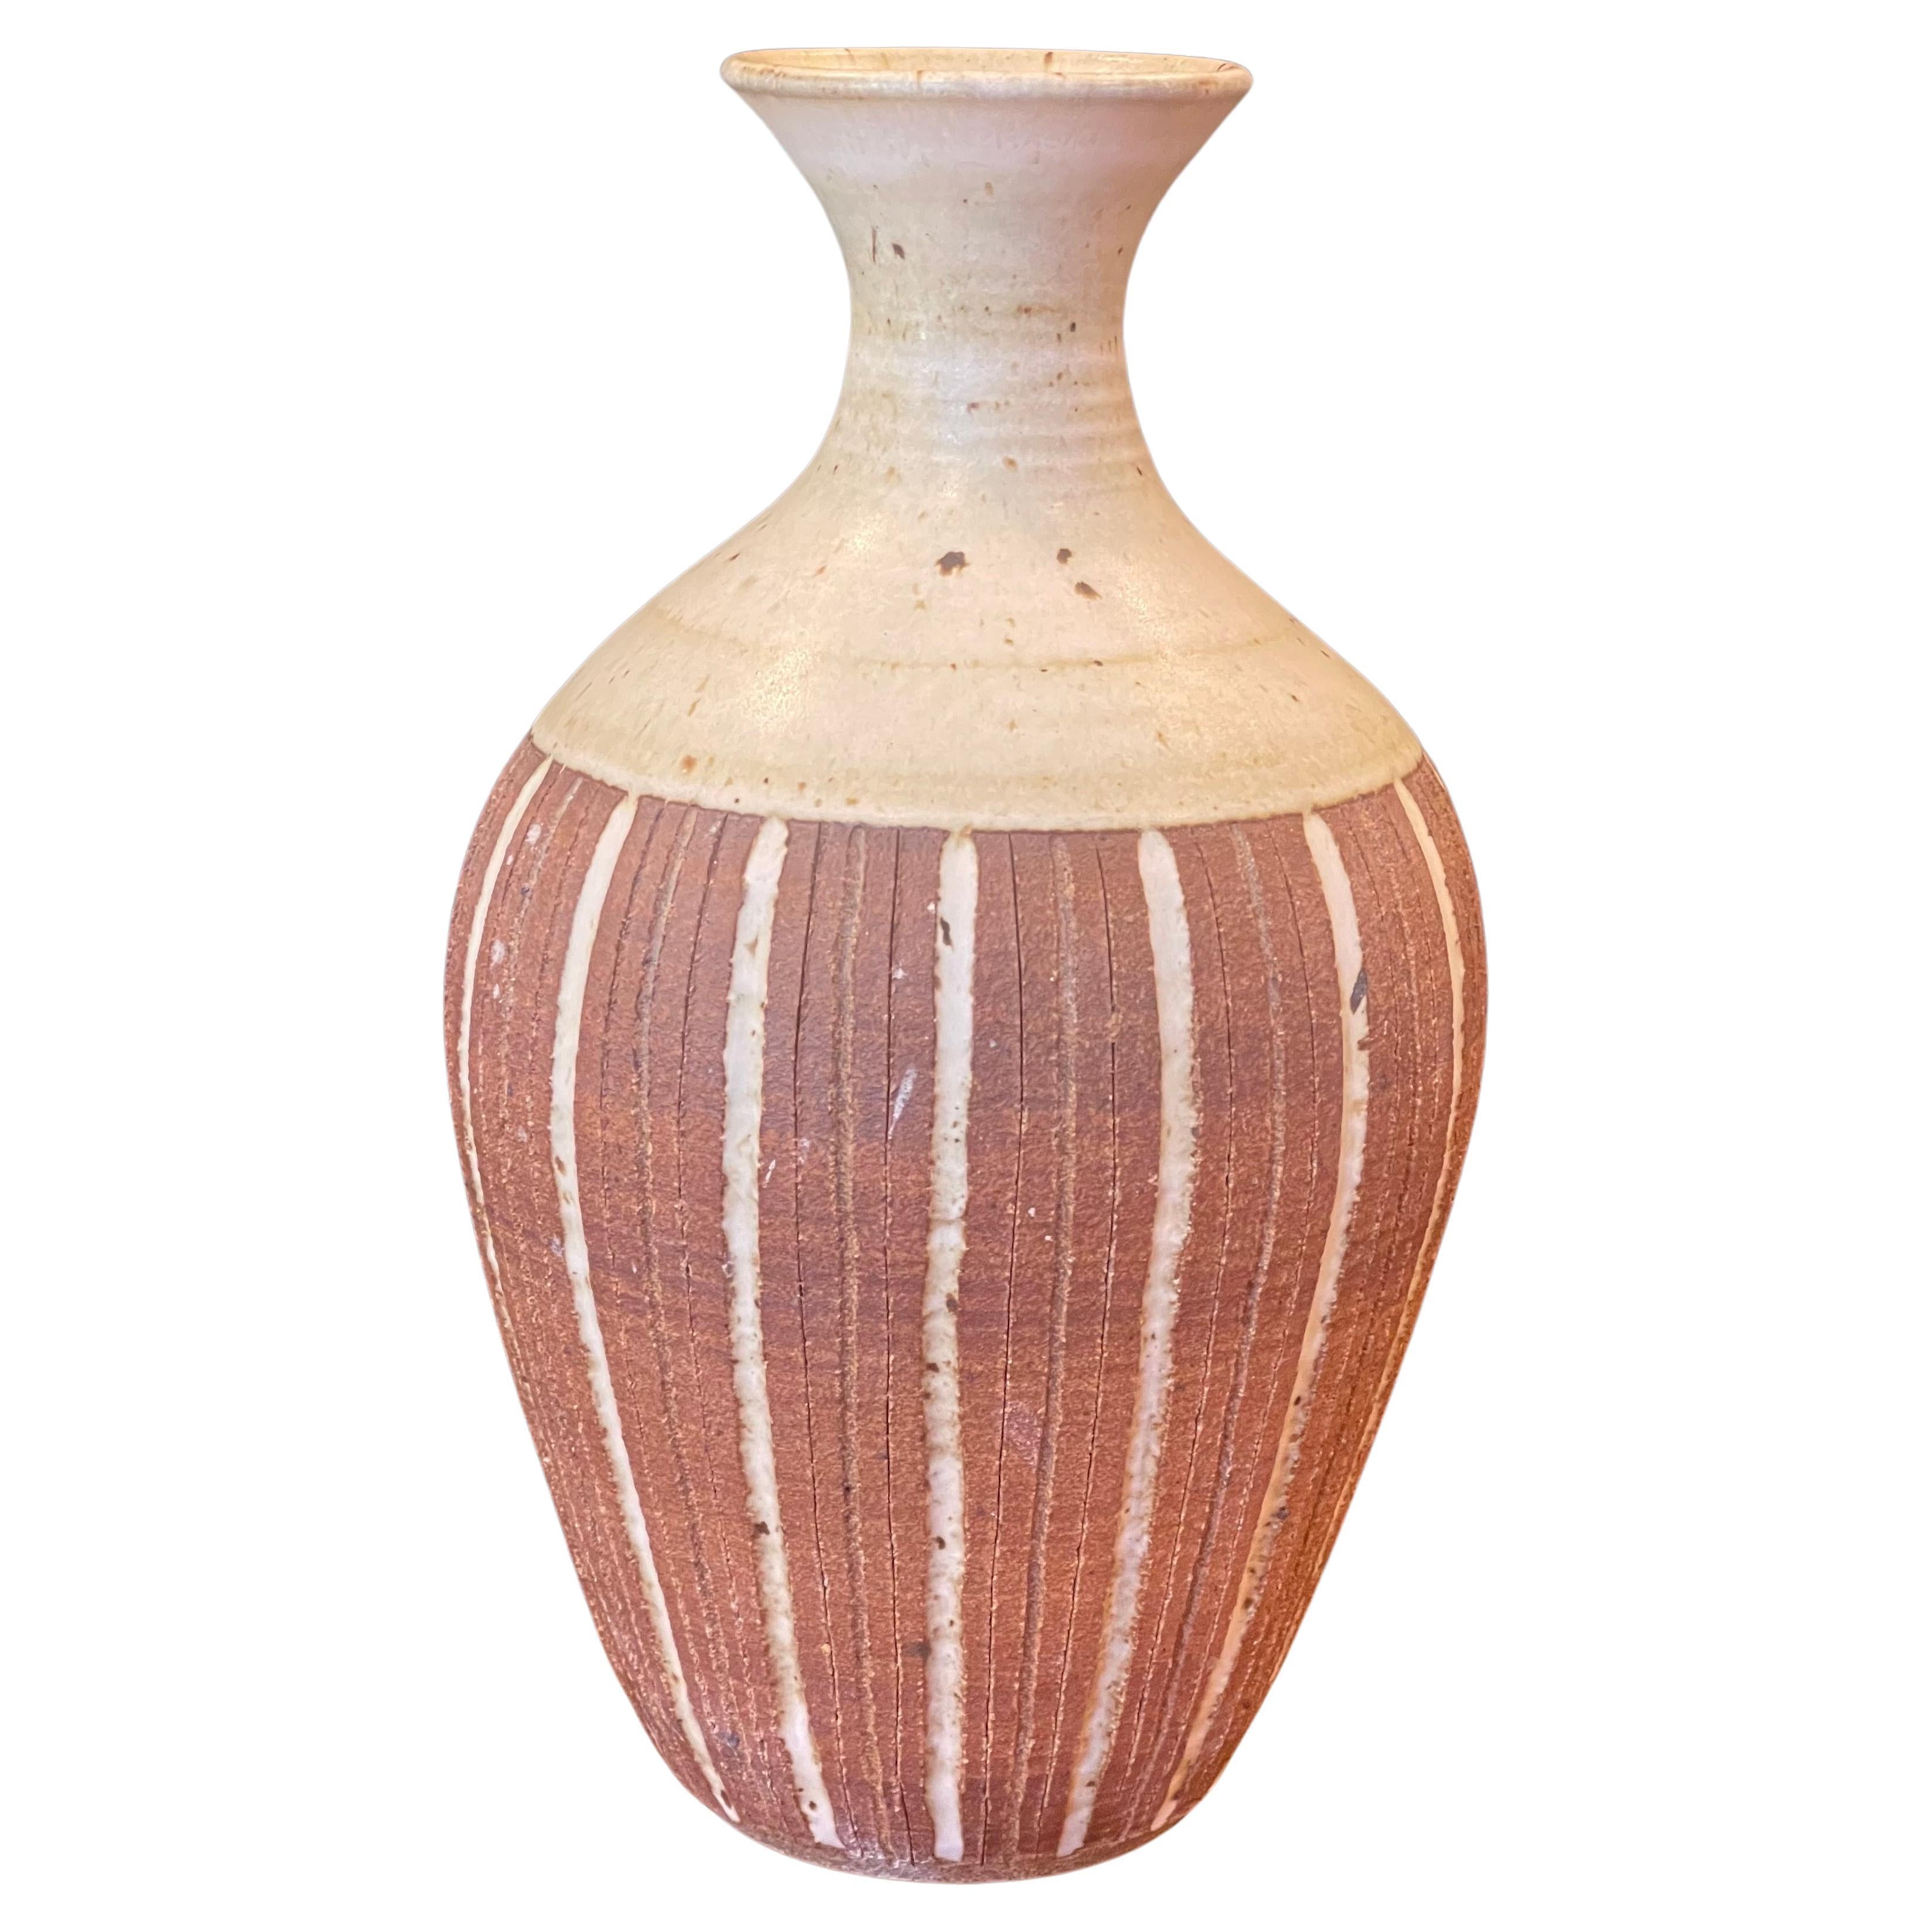 A very nice California studio pottery stoneware vase with beautiful tan and brown earth tones by San Diego artist Barbara Moorehead, circa 1970s. The vessel is in good vintage condition with the exception of one small chip on the lip (please see